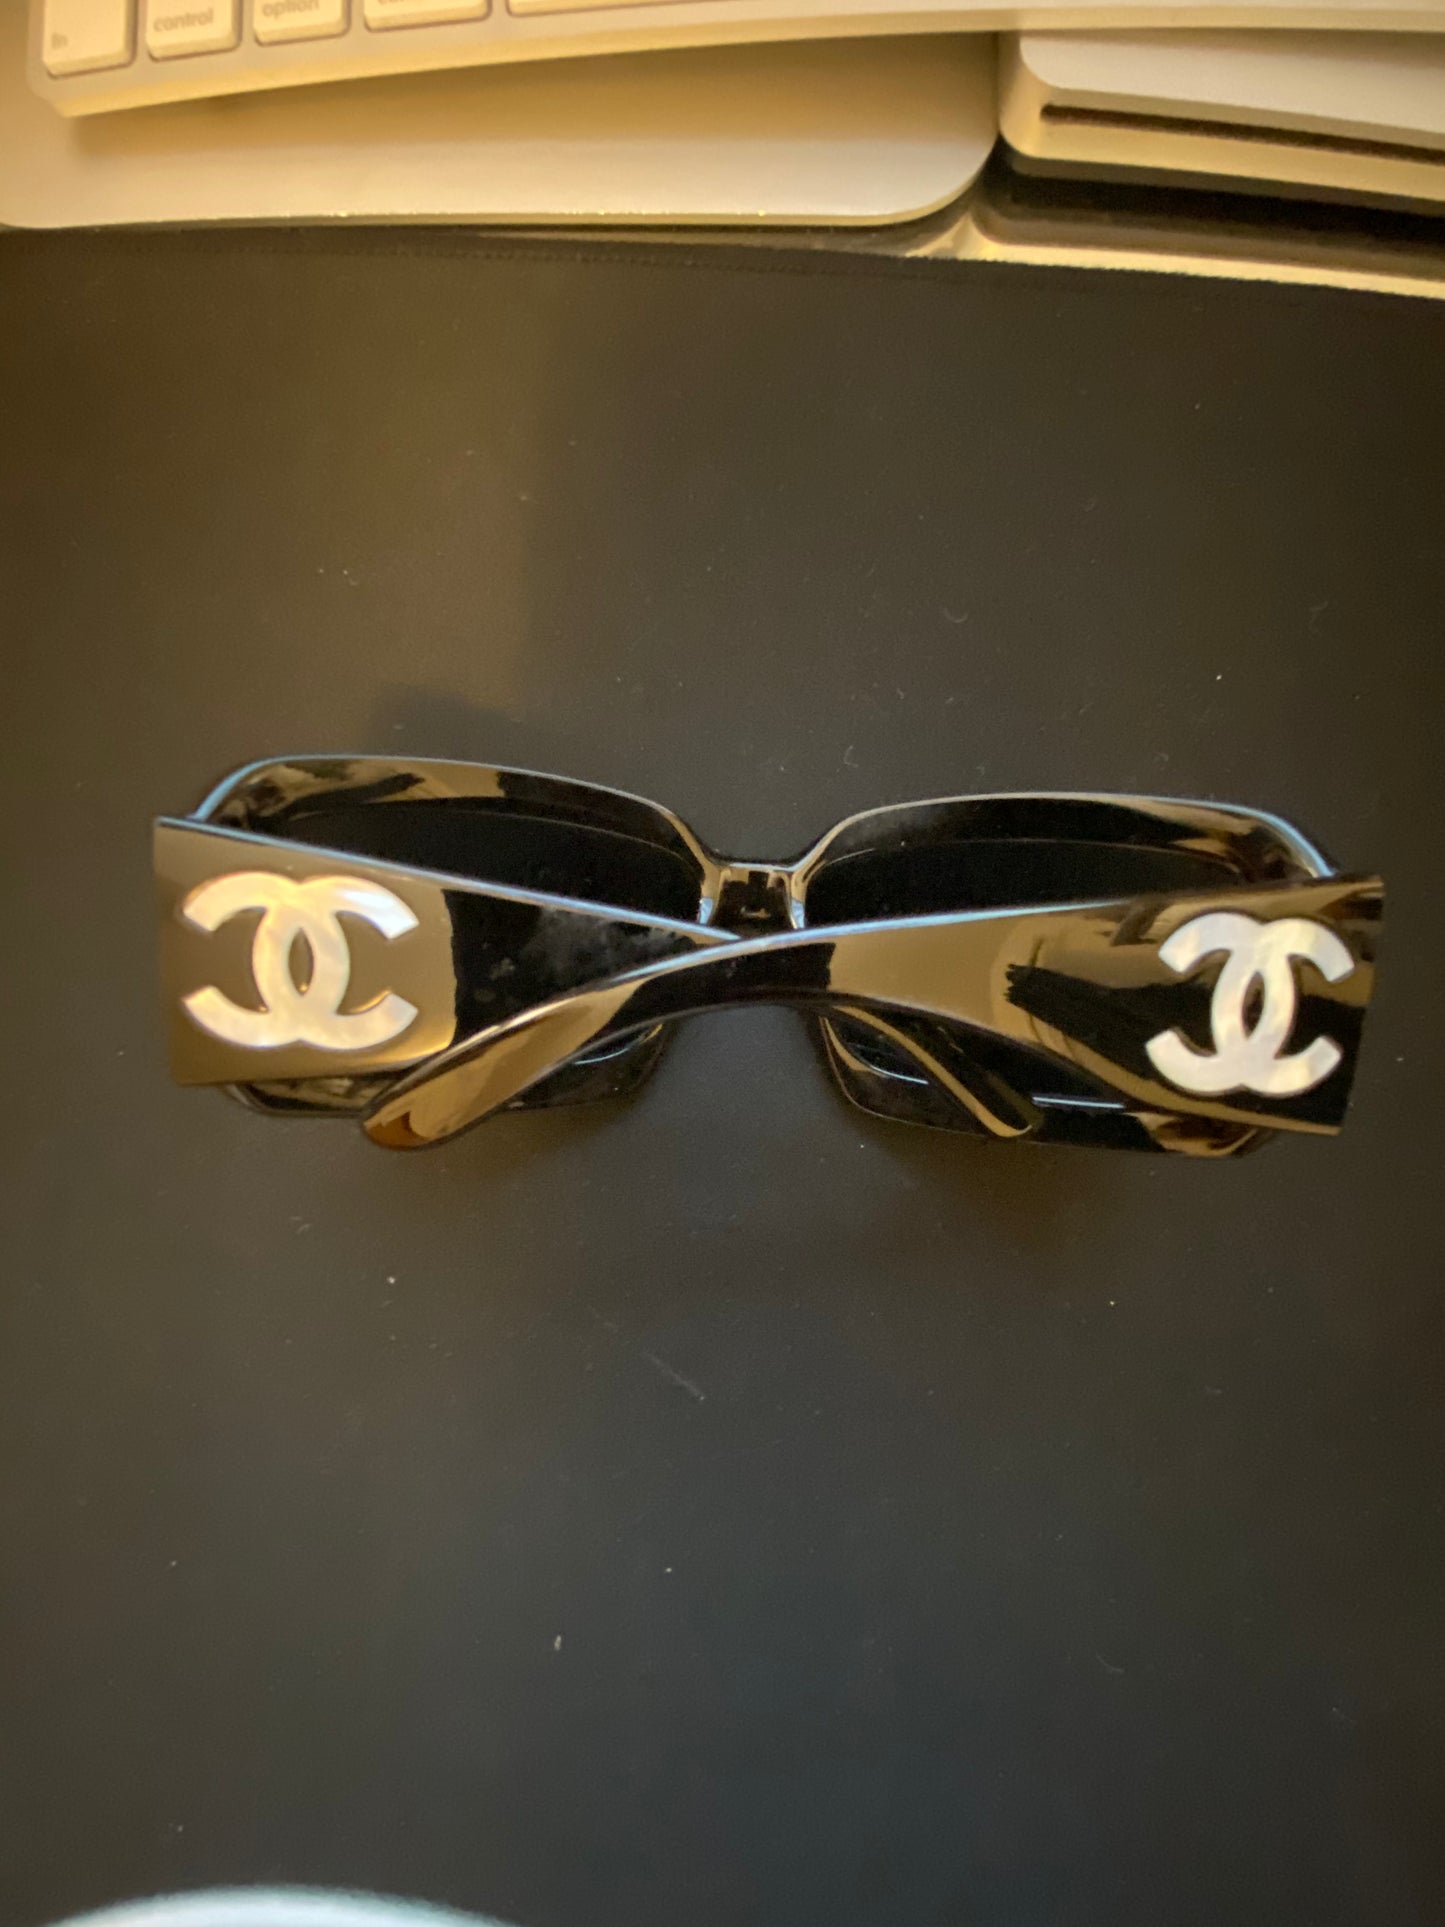 Used Accessories: Authentic Chanel Sunglasses